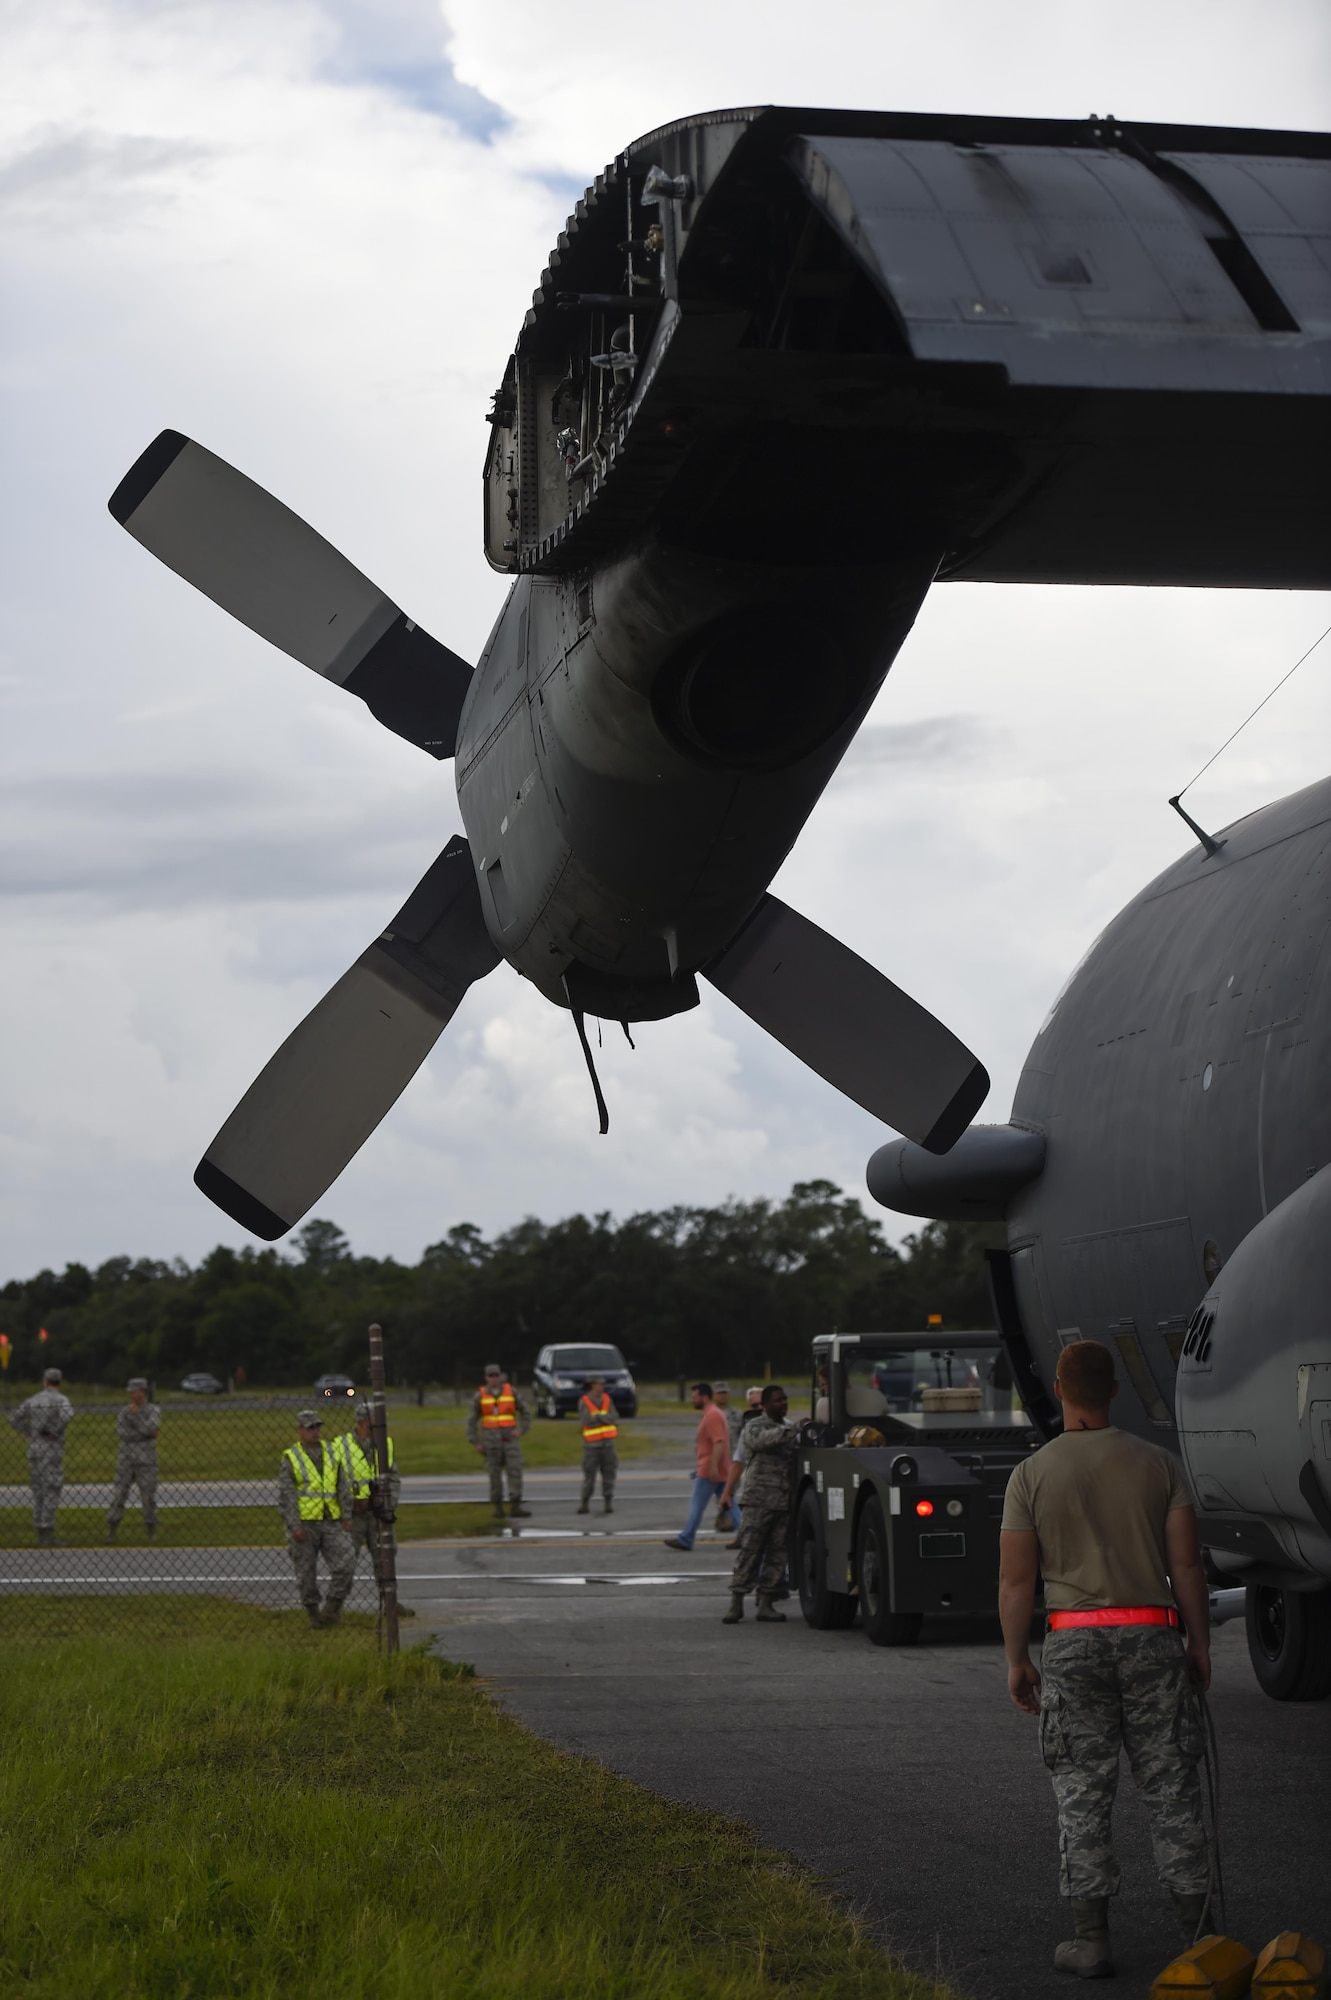 Airmen with the 1st Special Operations Wing prepare to tow an AC-130H Spectre to the Air Park on Hurlburt Field, Fla., Aug. 15, 2015. The Spectre was towed from the flightline and staged for installation in the Hurlburt Field Air Park. The AC-130H fleet retired May 26, 2015, after more than 45 years of service. The installation process for this aircraft, known as “Wicked Wanda,” is set to be complete by Aug. 28, 2015. (U.S. Air Force photo by Airman Kai White/Released)